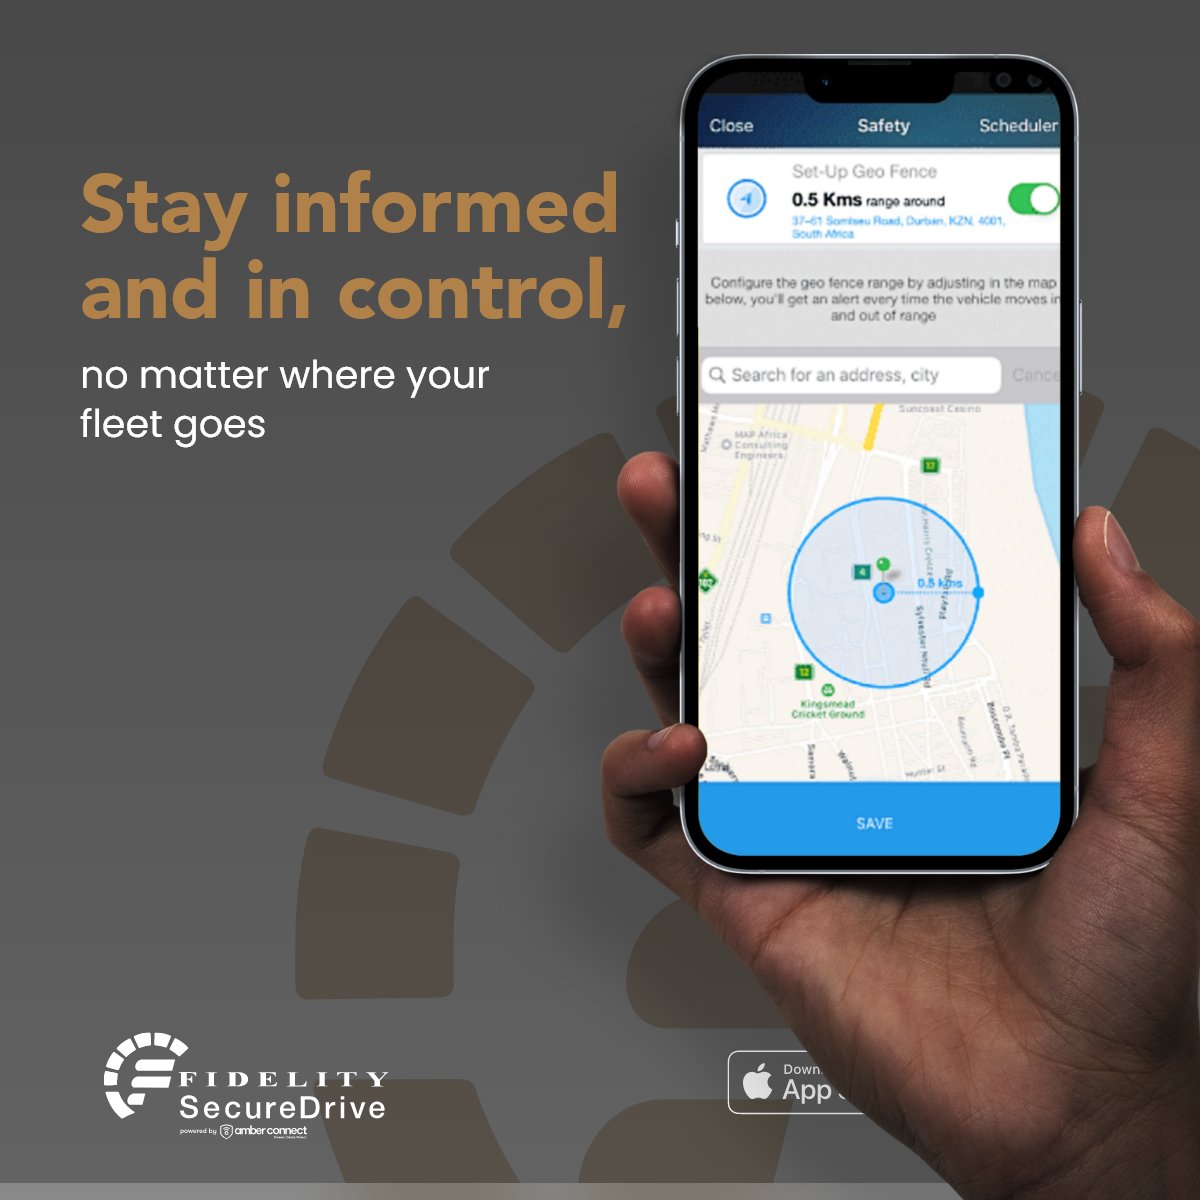 Fidelity SecureDrive’s geo-fencing capabilities let you define virtual areas on a map and receive alerts when vehicles enter or leave these zones.

#FidelitySecureDrive #VehicleTracking #YourDrivingCompanion